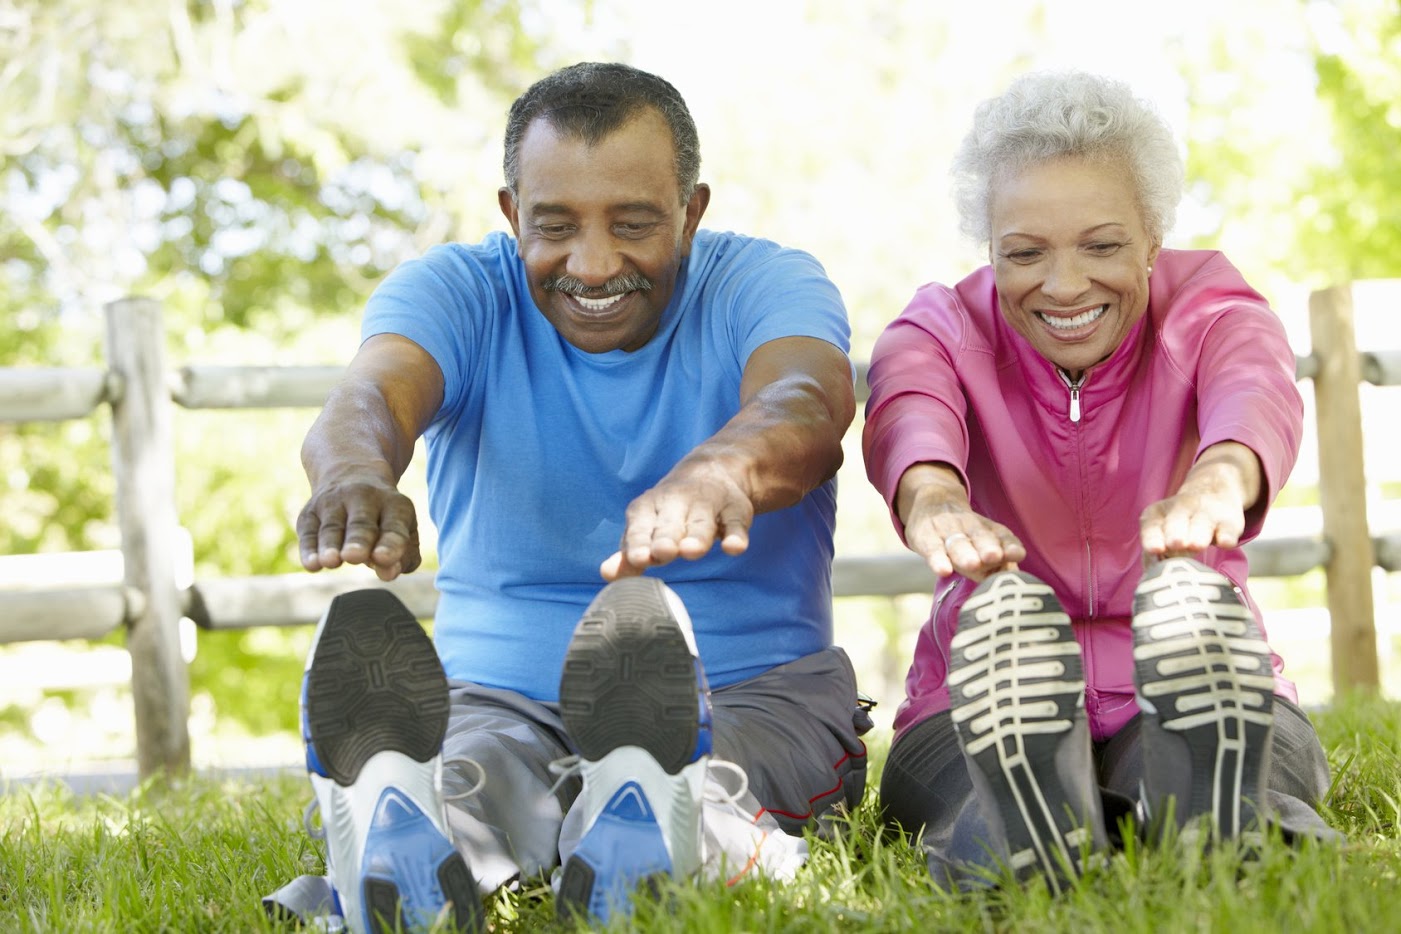 If you are a senior and looking on how Physical Therapy could help, AAA PT is here!